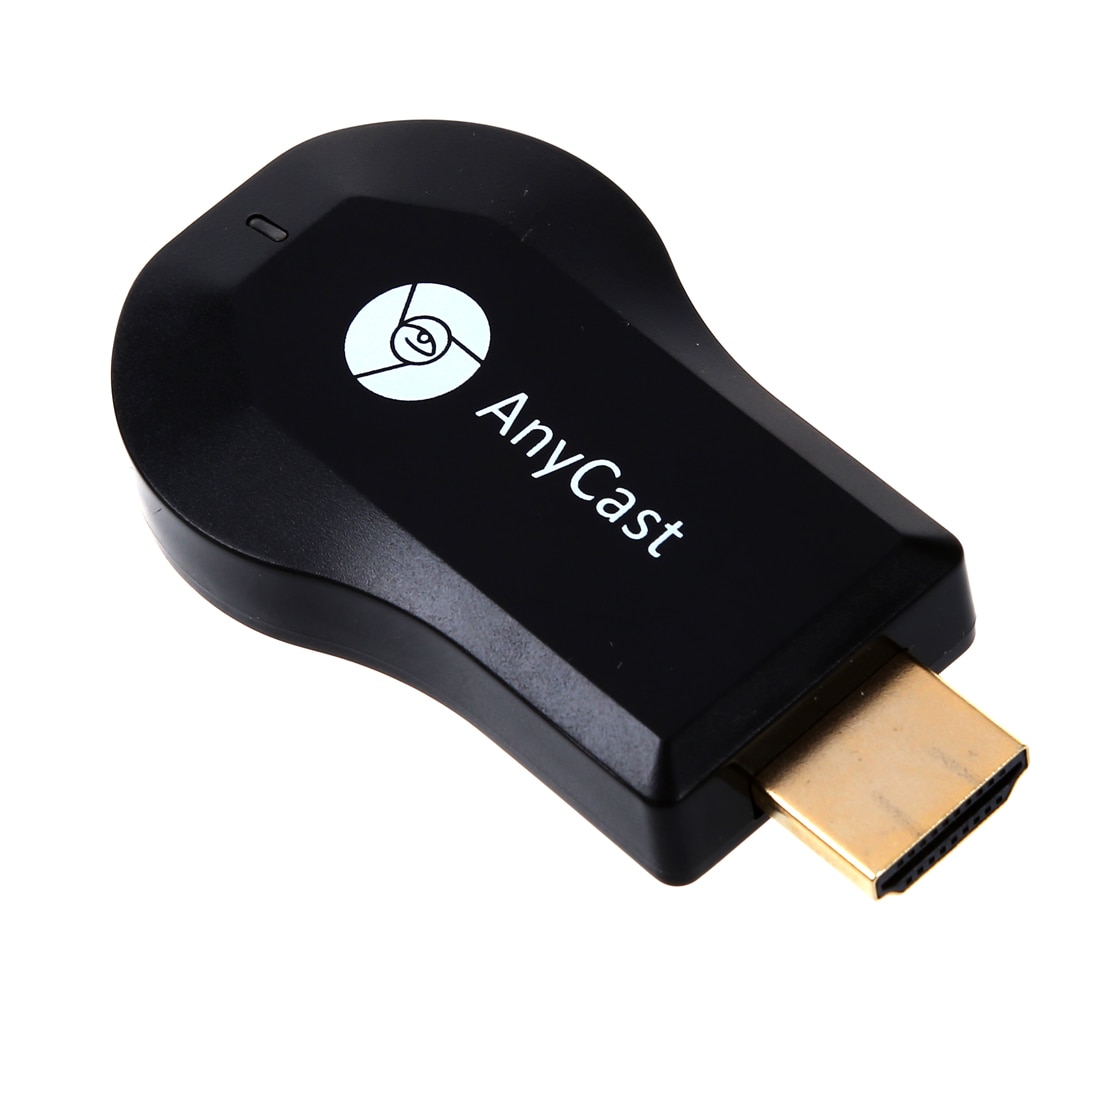 Anycast M2 Plus Mini Wifi Display Dongle Ontvanger 1080P Airmirror Dlna Airplay Miracast Hdmi Poort